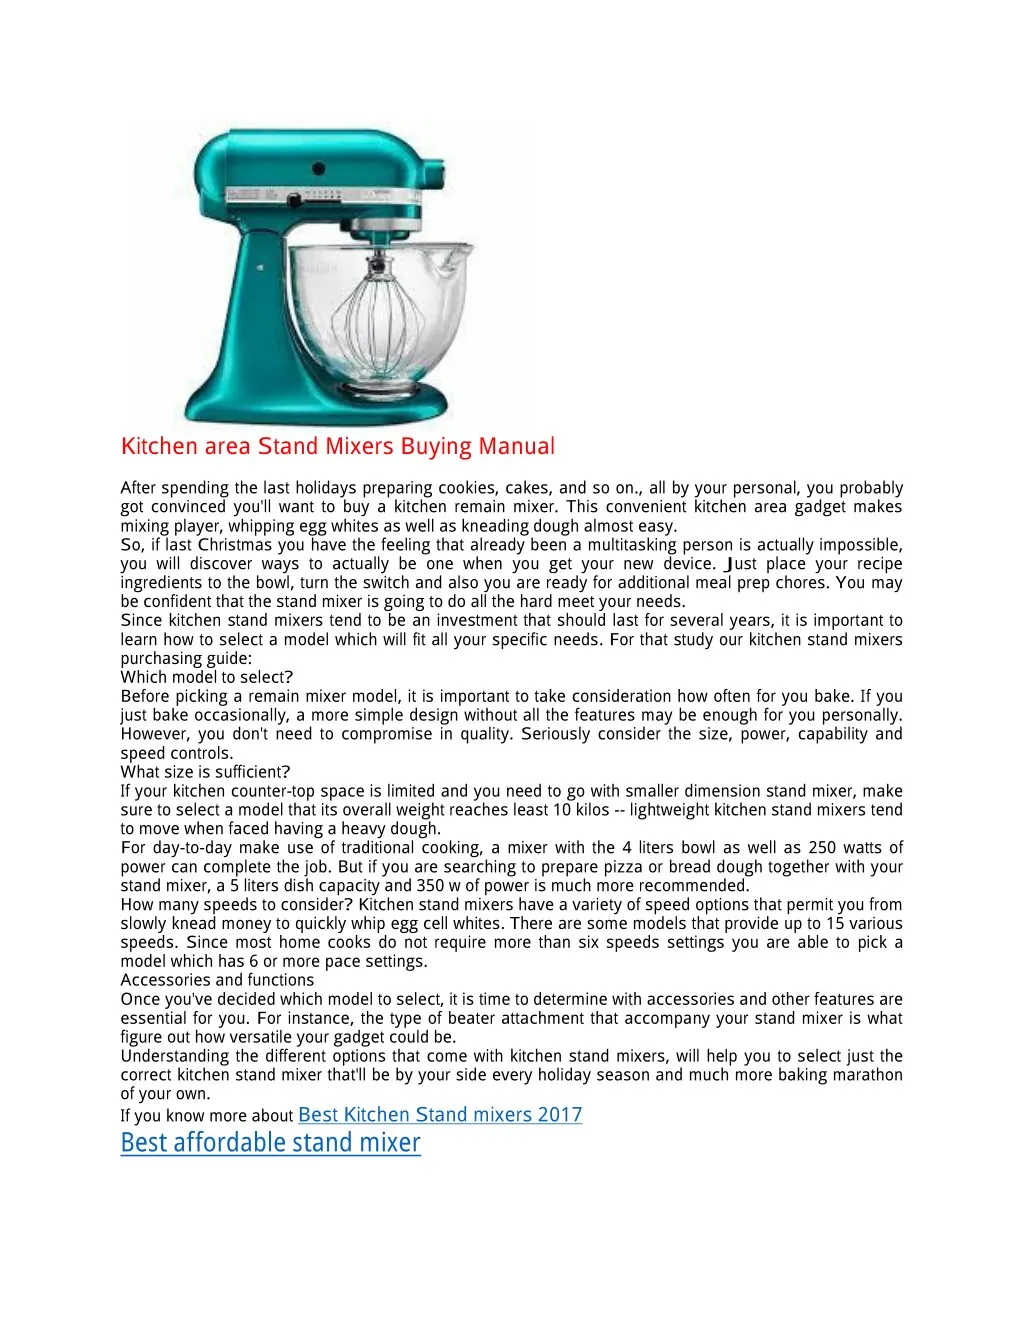 kitchen area stand mixers buying manual after